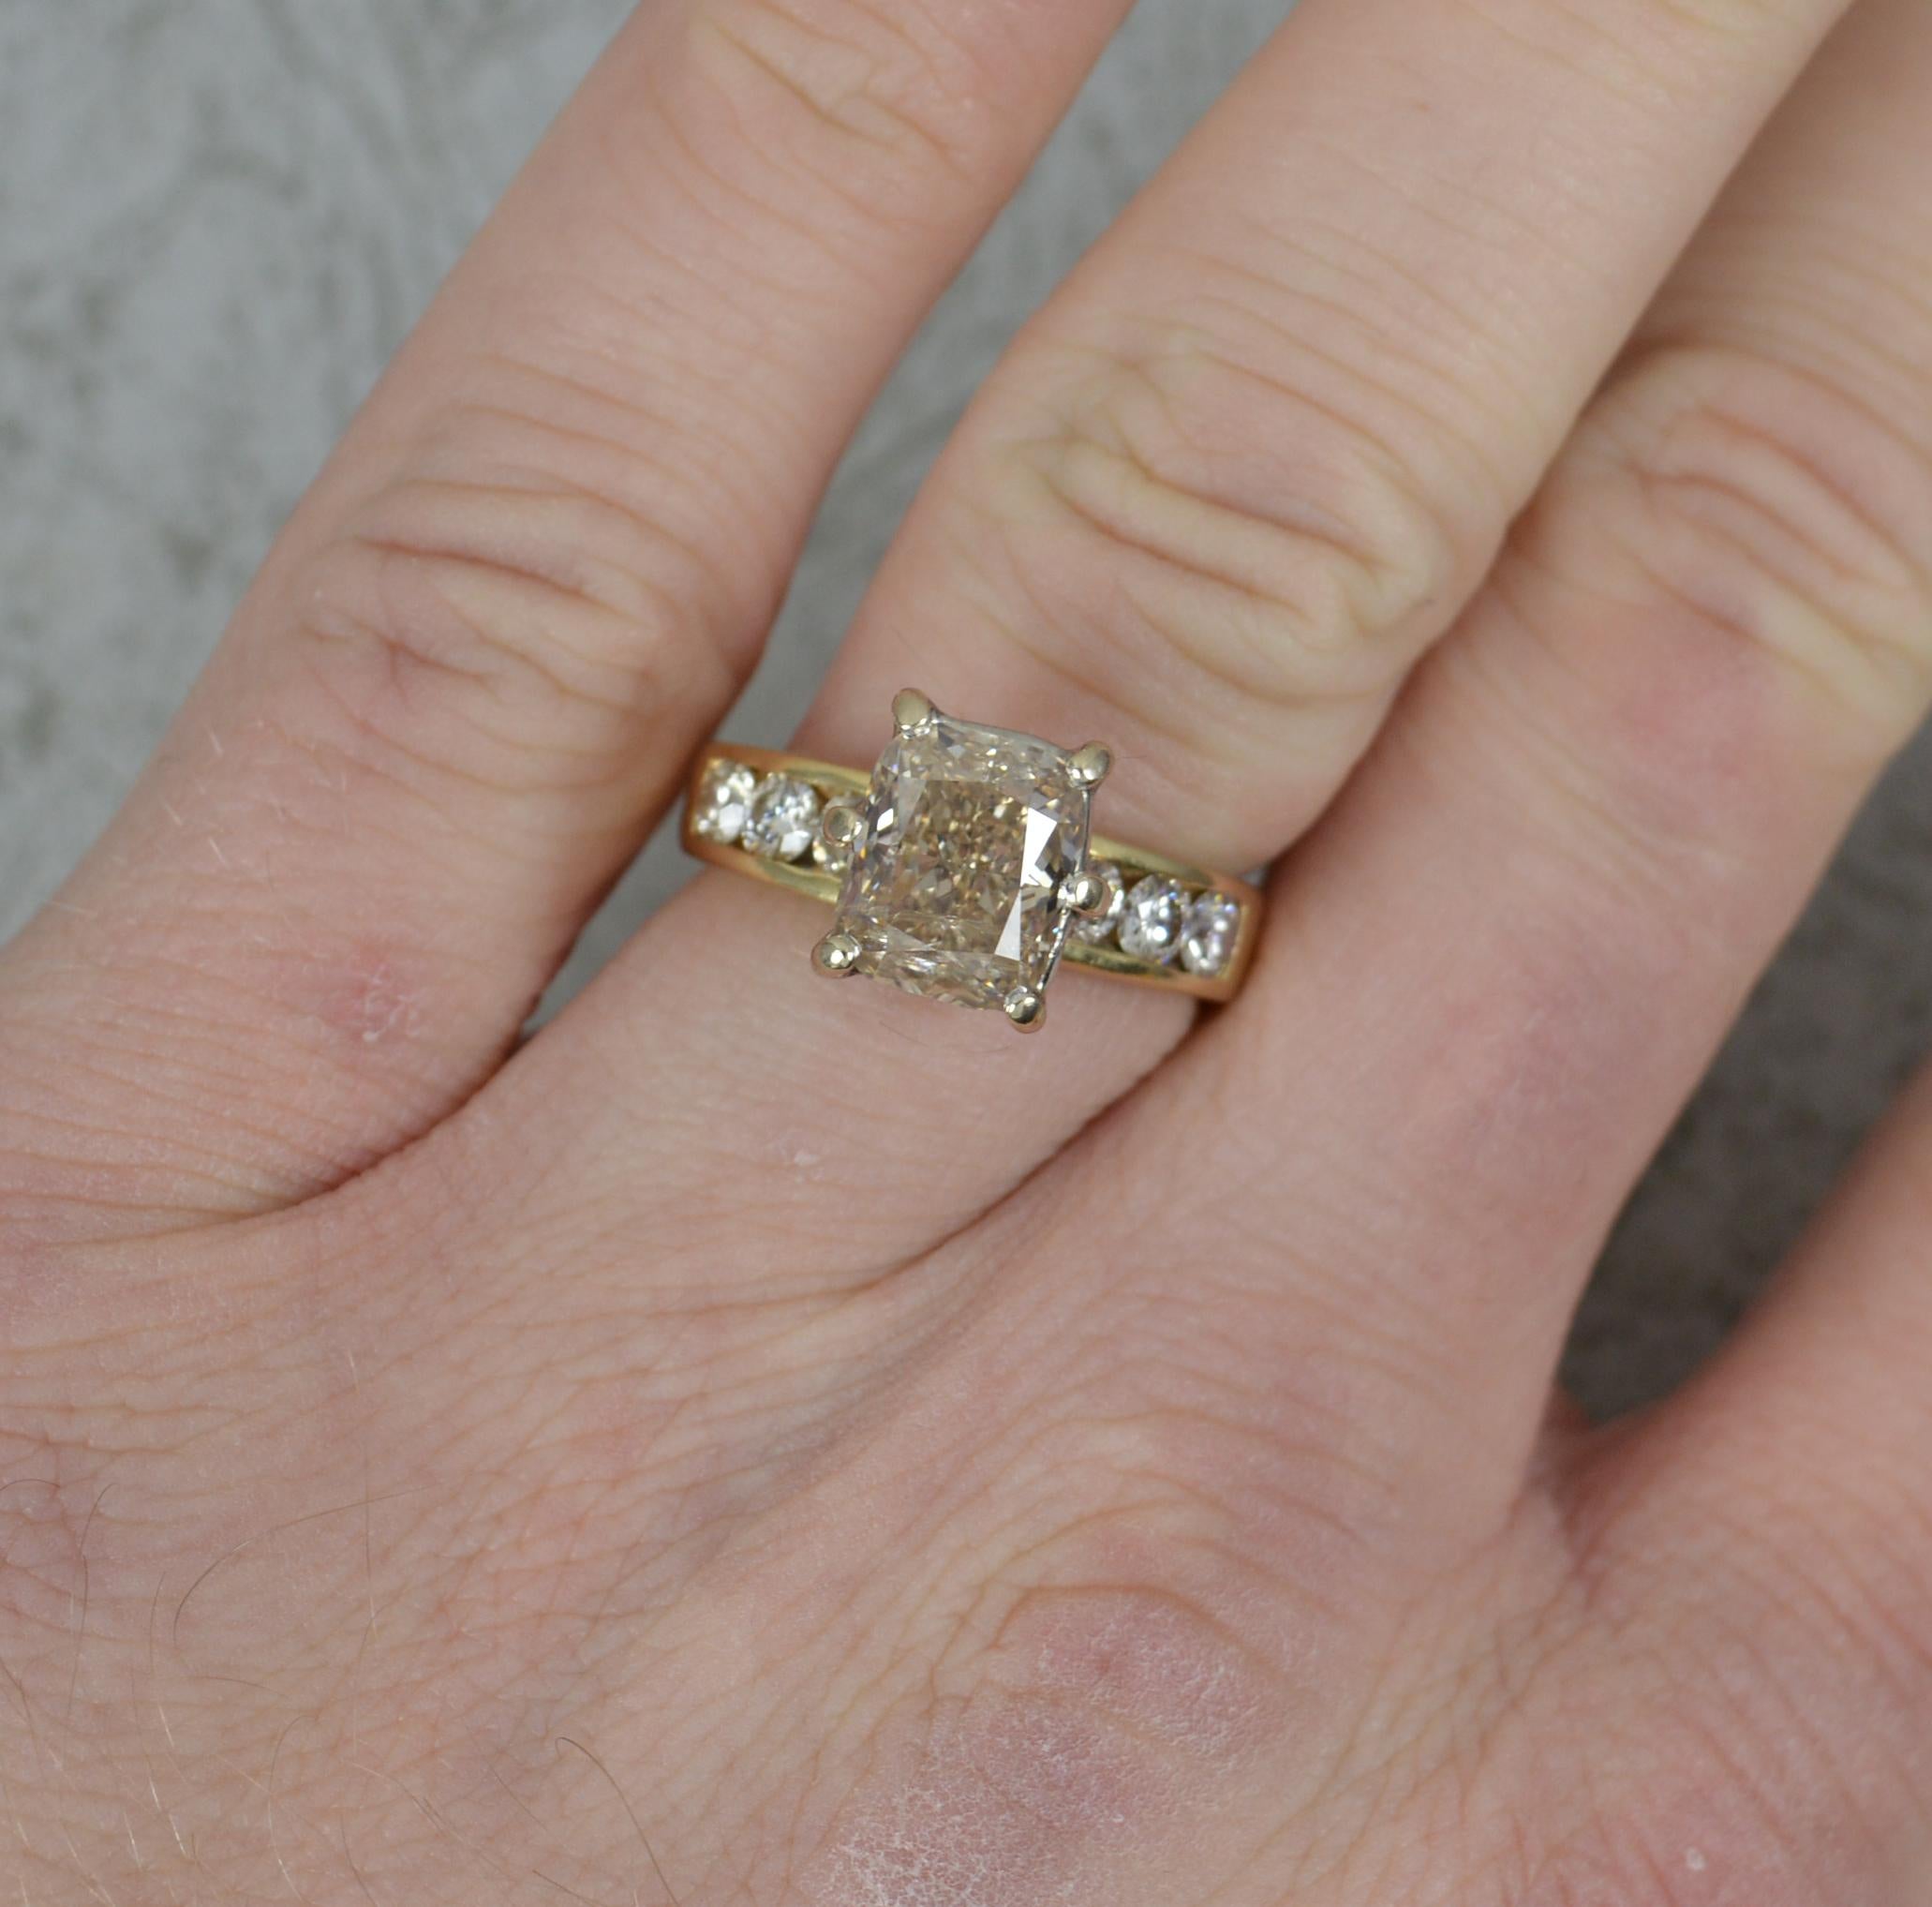 A wonderful diamond engagement ring.
Solid 18 carat yellow gold example.
Designed with a large, radiant cut, natural diamond to centre. 7mm x 8.6mm approx 2.5 carats approx. To the shoulders are an additional six round brilliant cut diamonds,